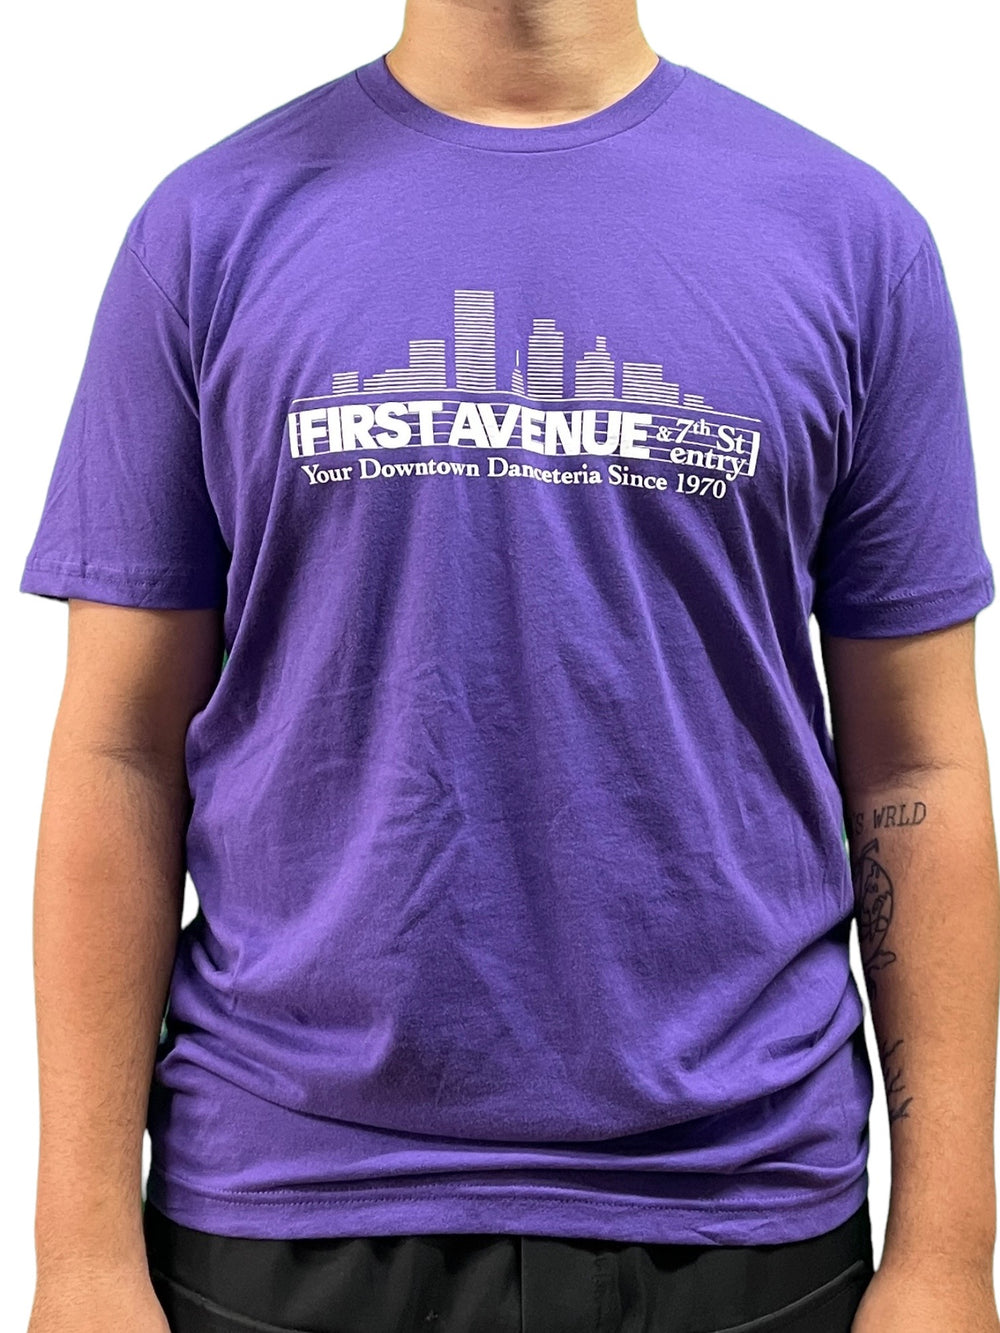 Prince – First Avenue Purple With White Skyline Official Unisex T Shirt Various Sizes NEW